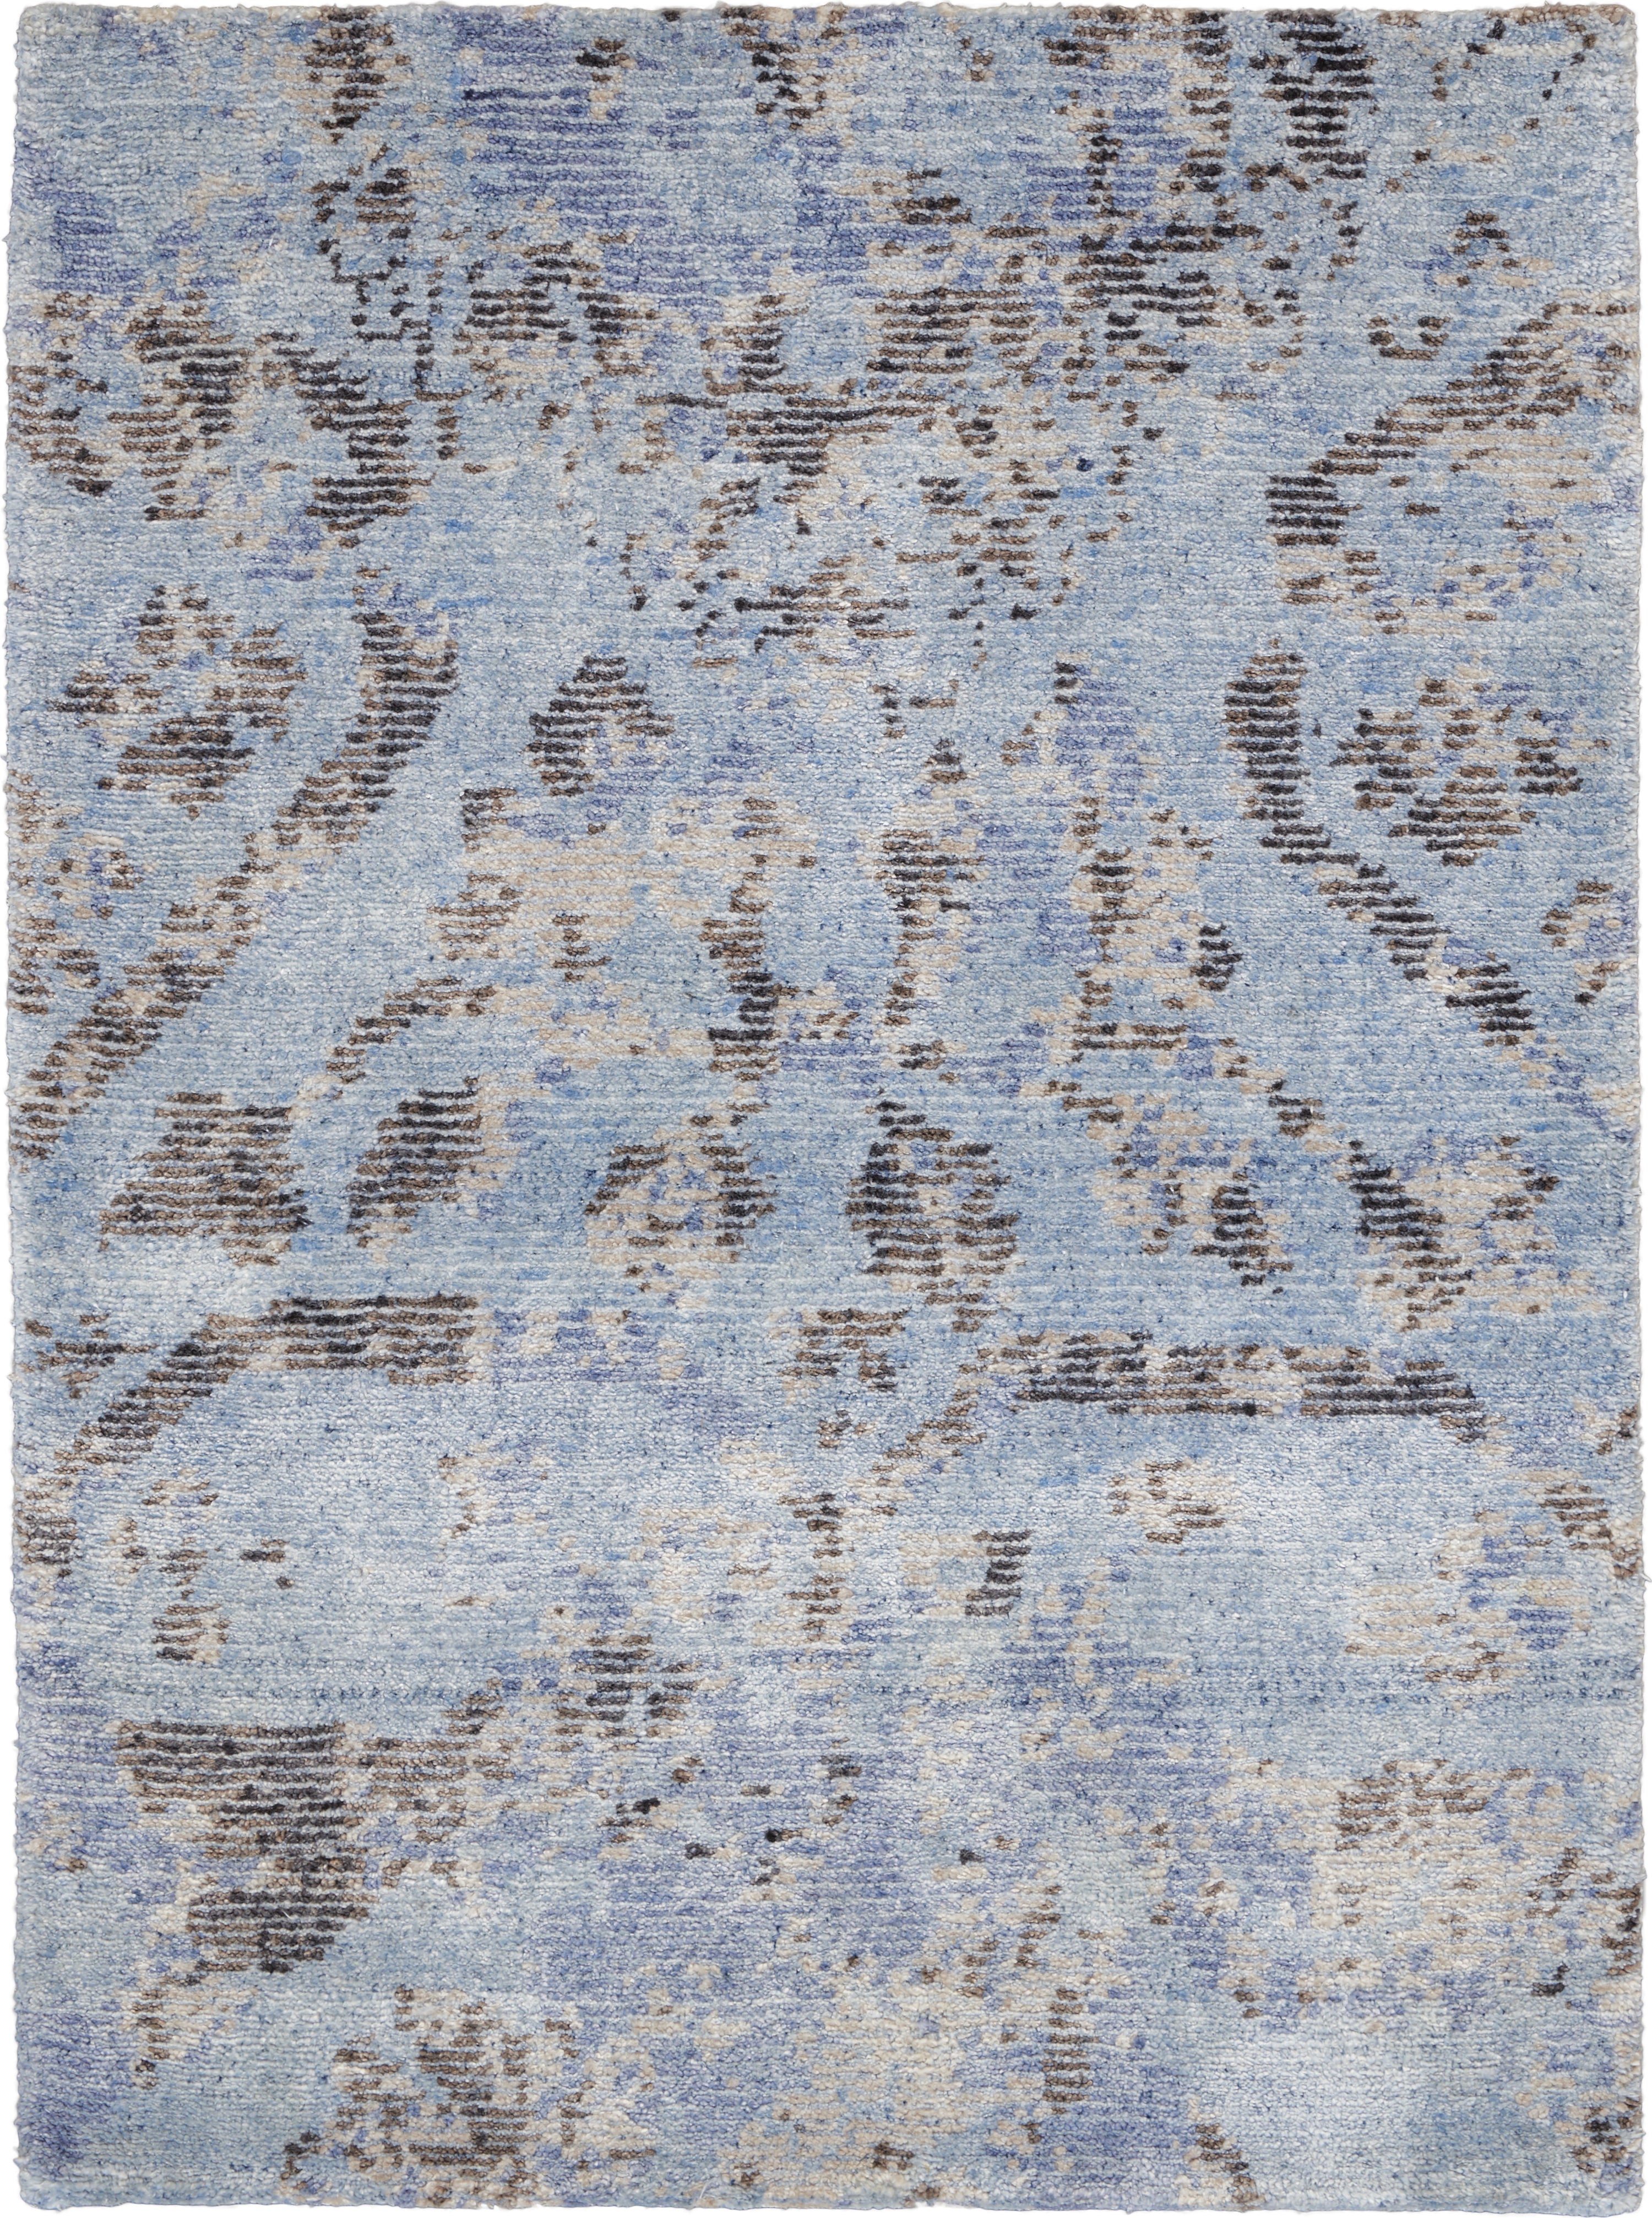 Vintage-inspired rug with a distressed blue design adds timeless charm.